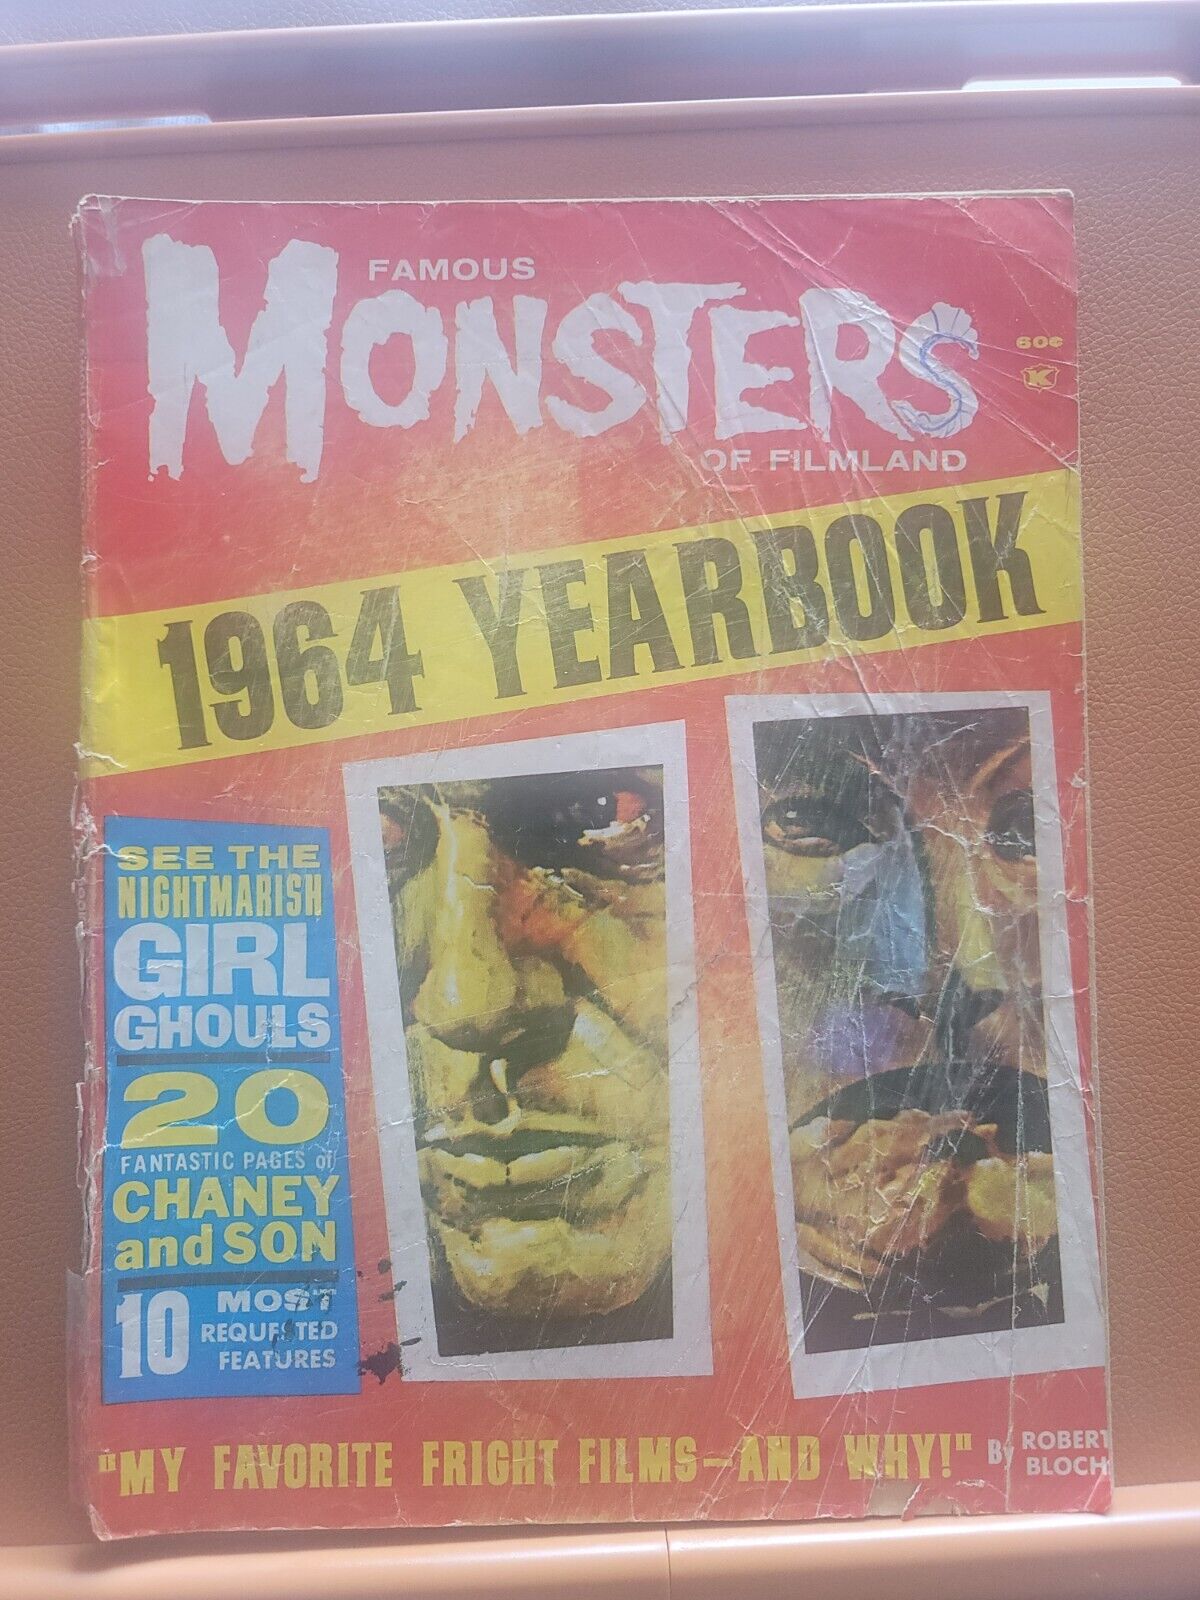 FAMOUS MONSTERS of FILMLAND 1964 YEARBOOK MONSTER MAGAZINE ROBERT BLOCH CHANEY